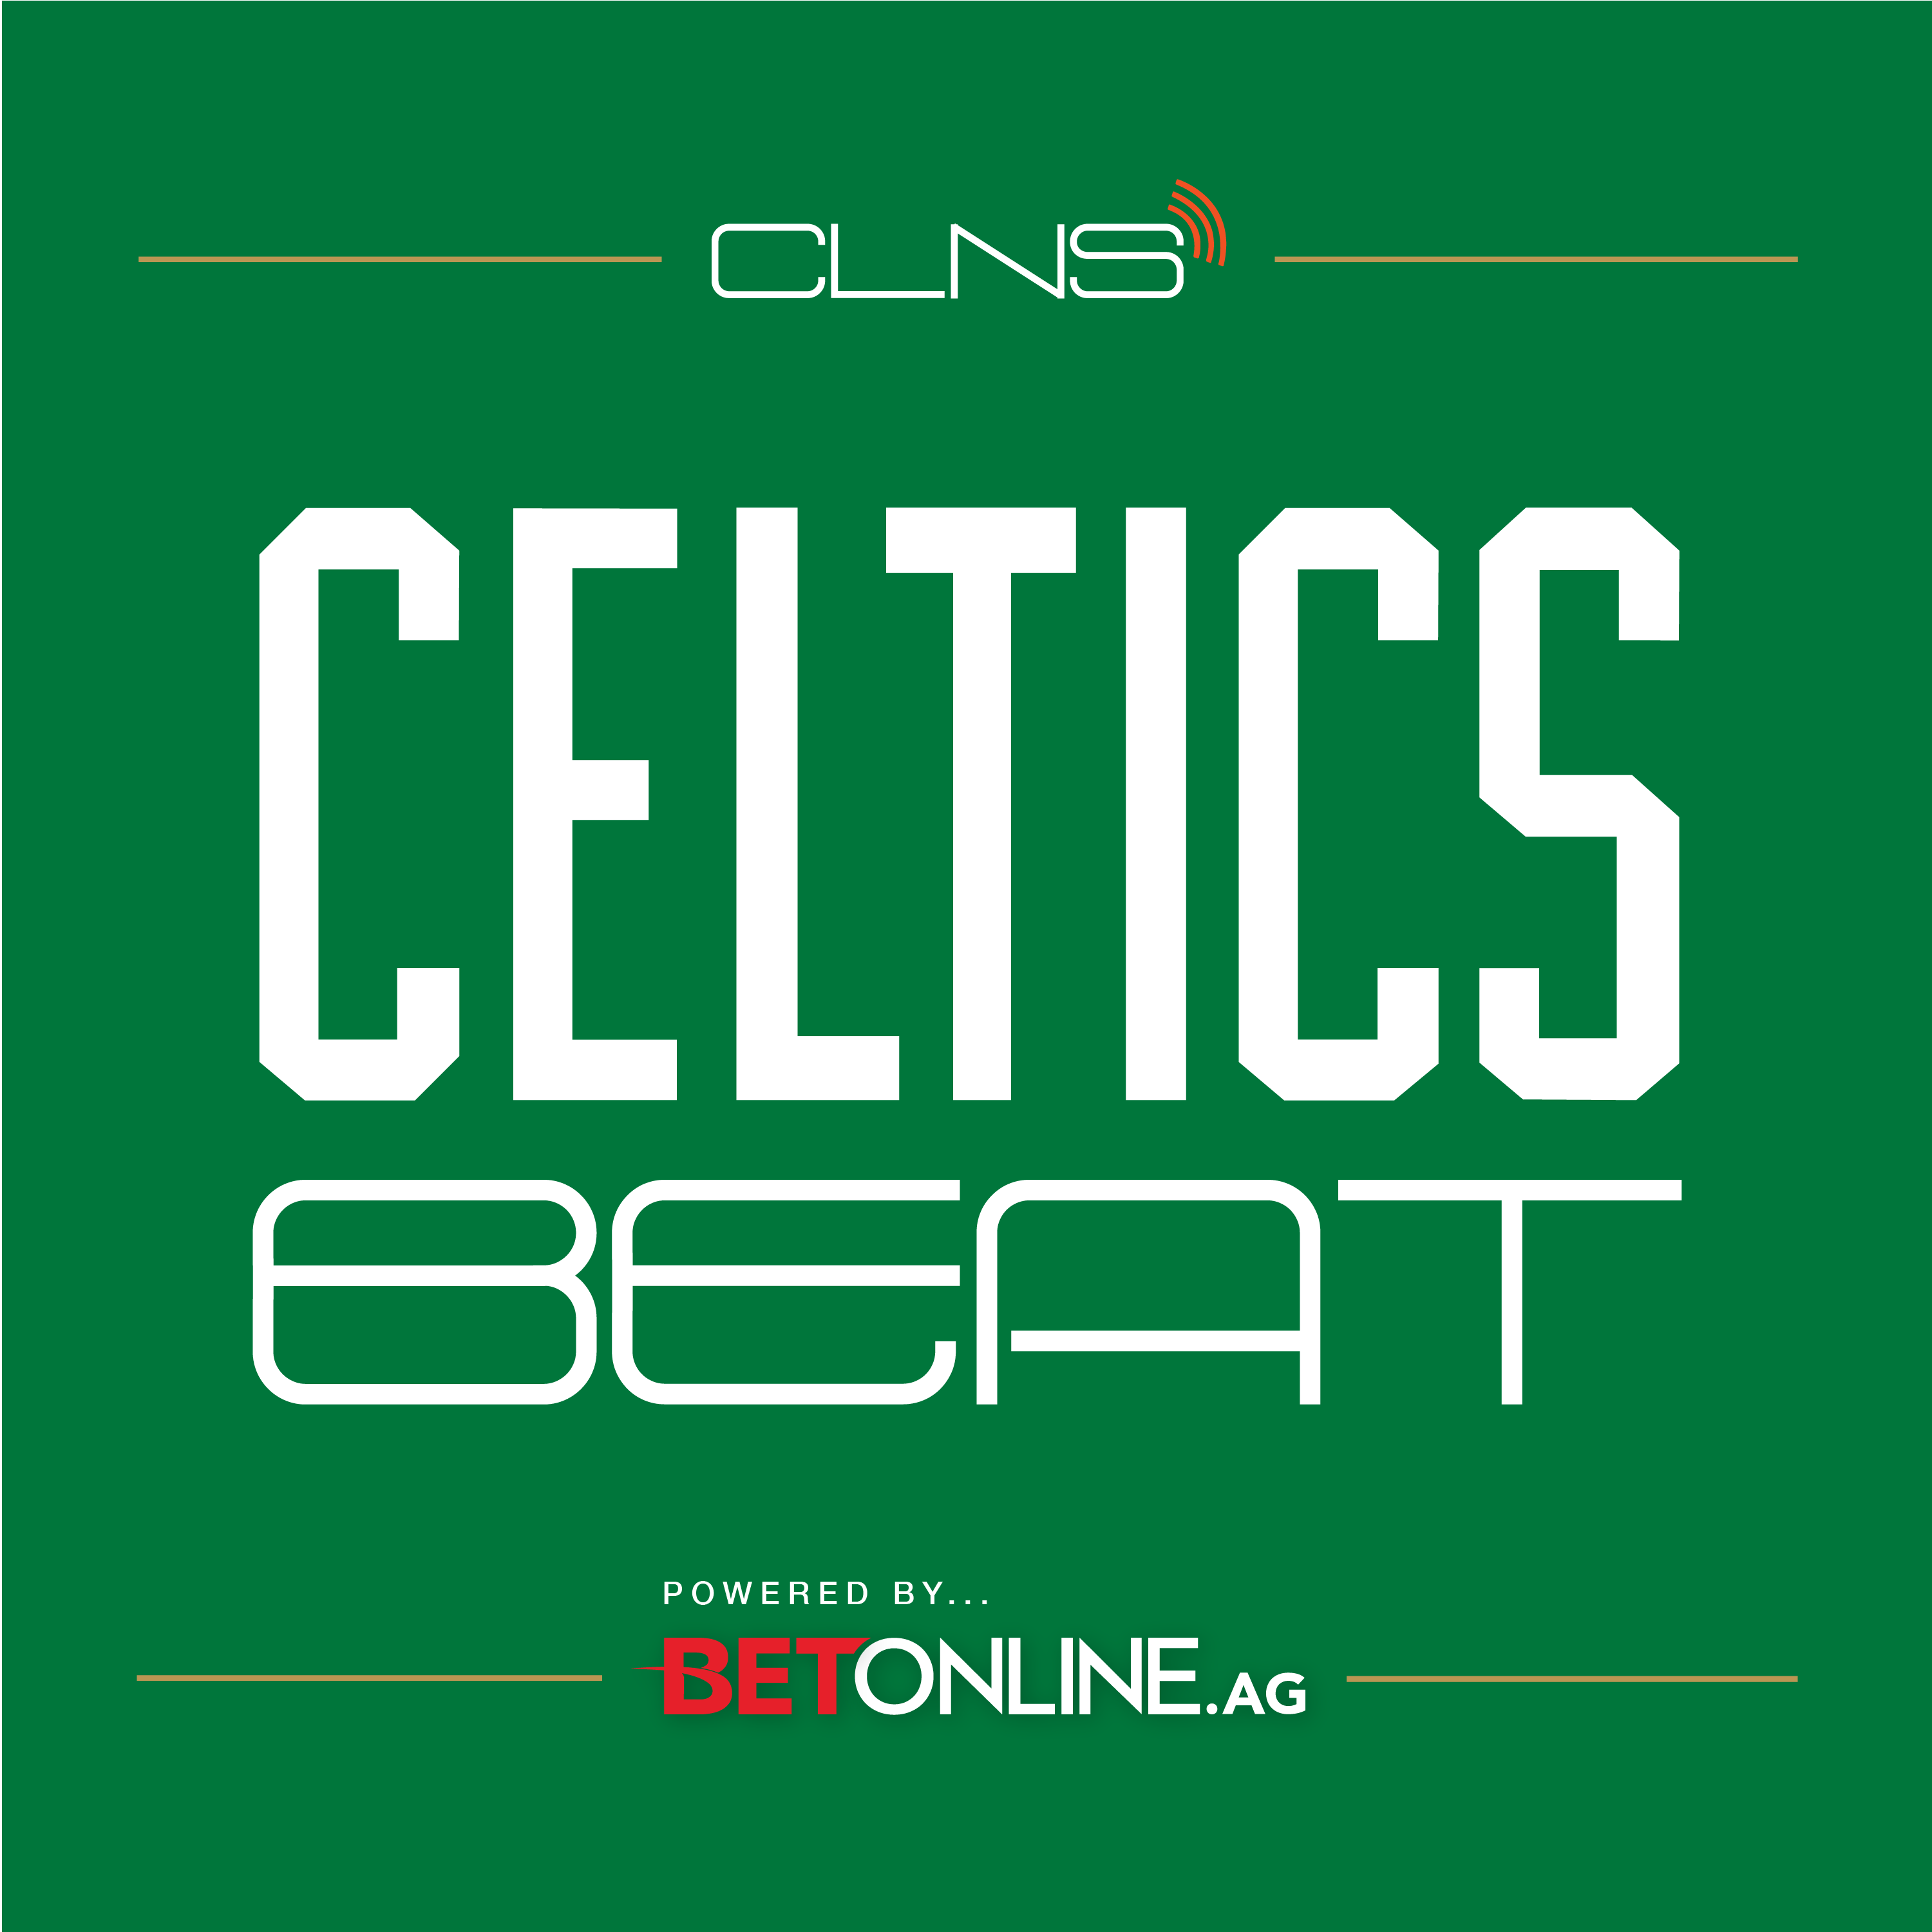 A highlight from 456: The Celtics BIG Advantage Over the Nets w/ Gary Washburn